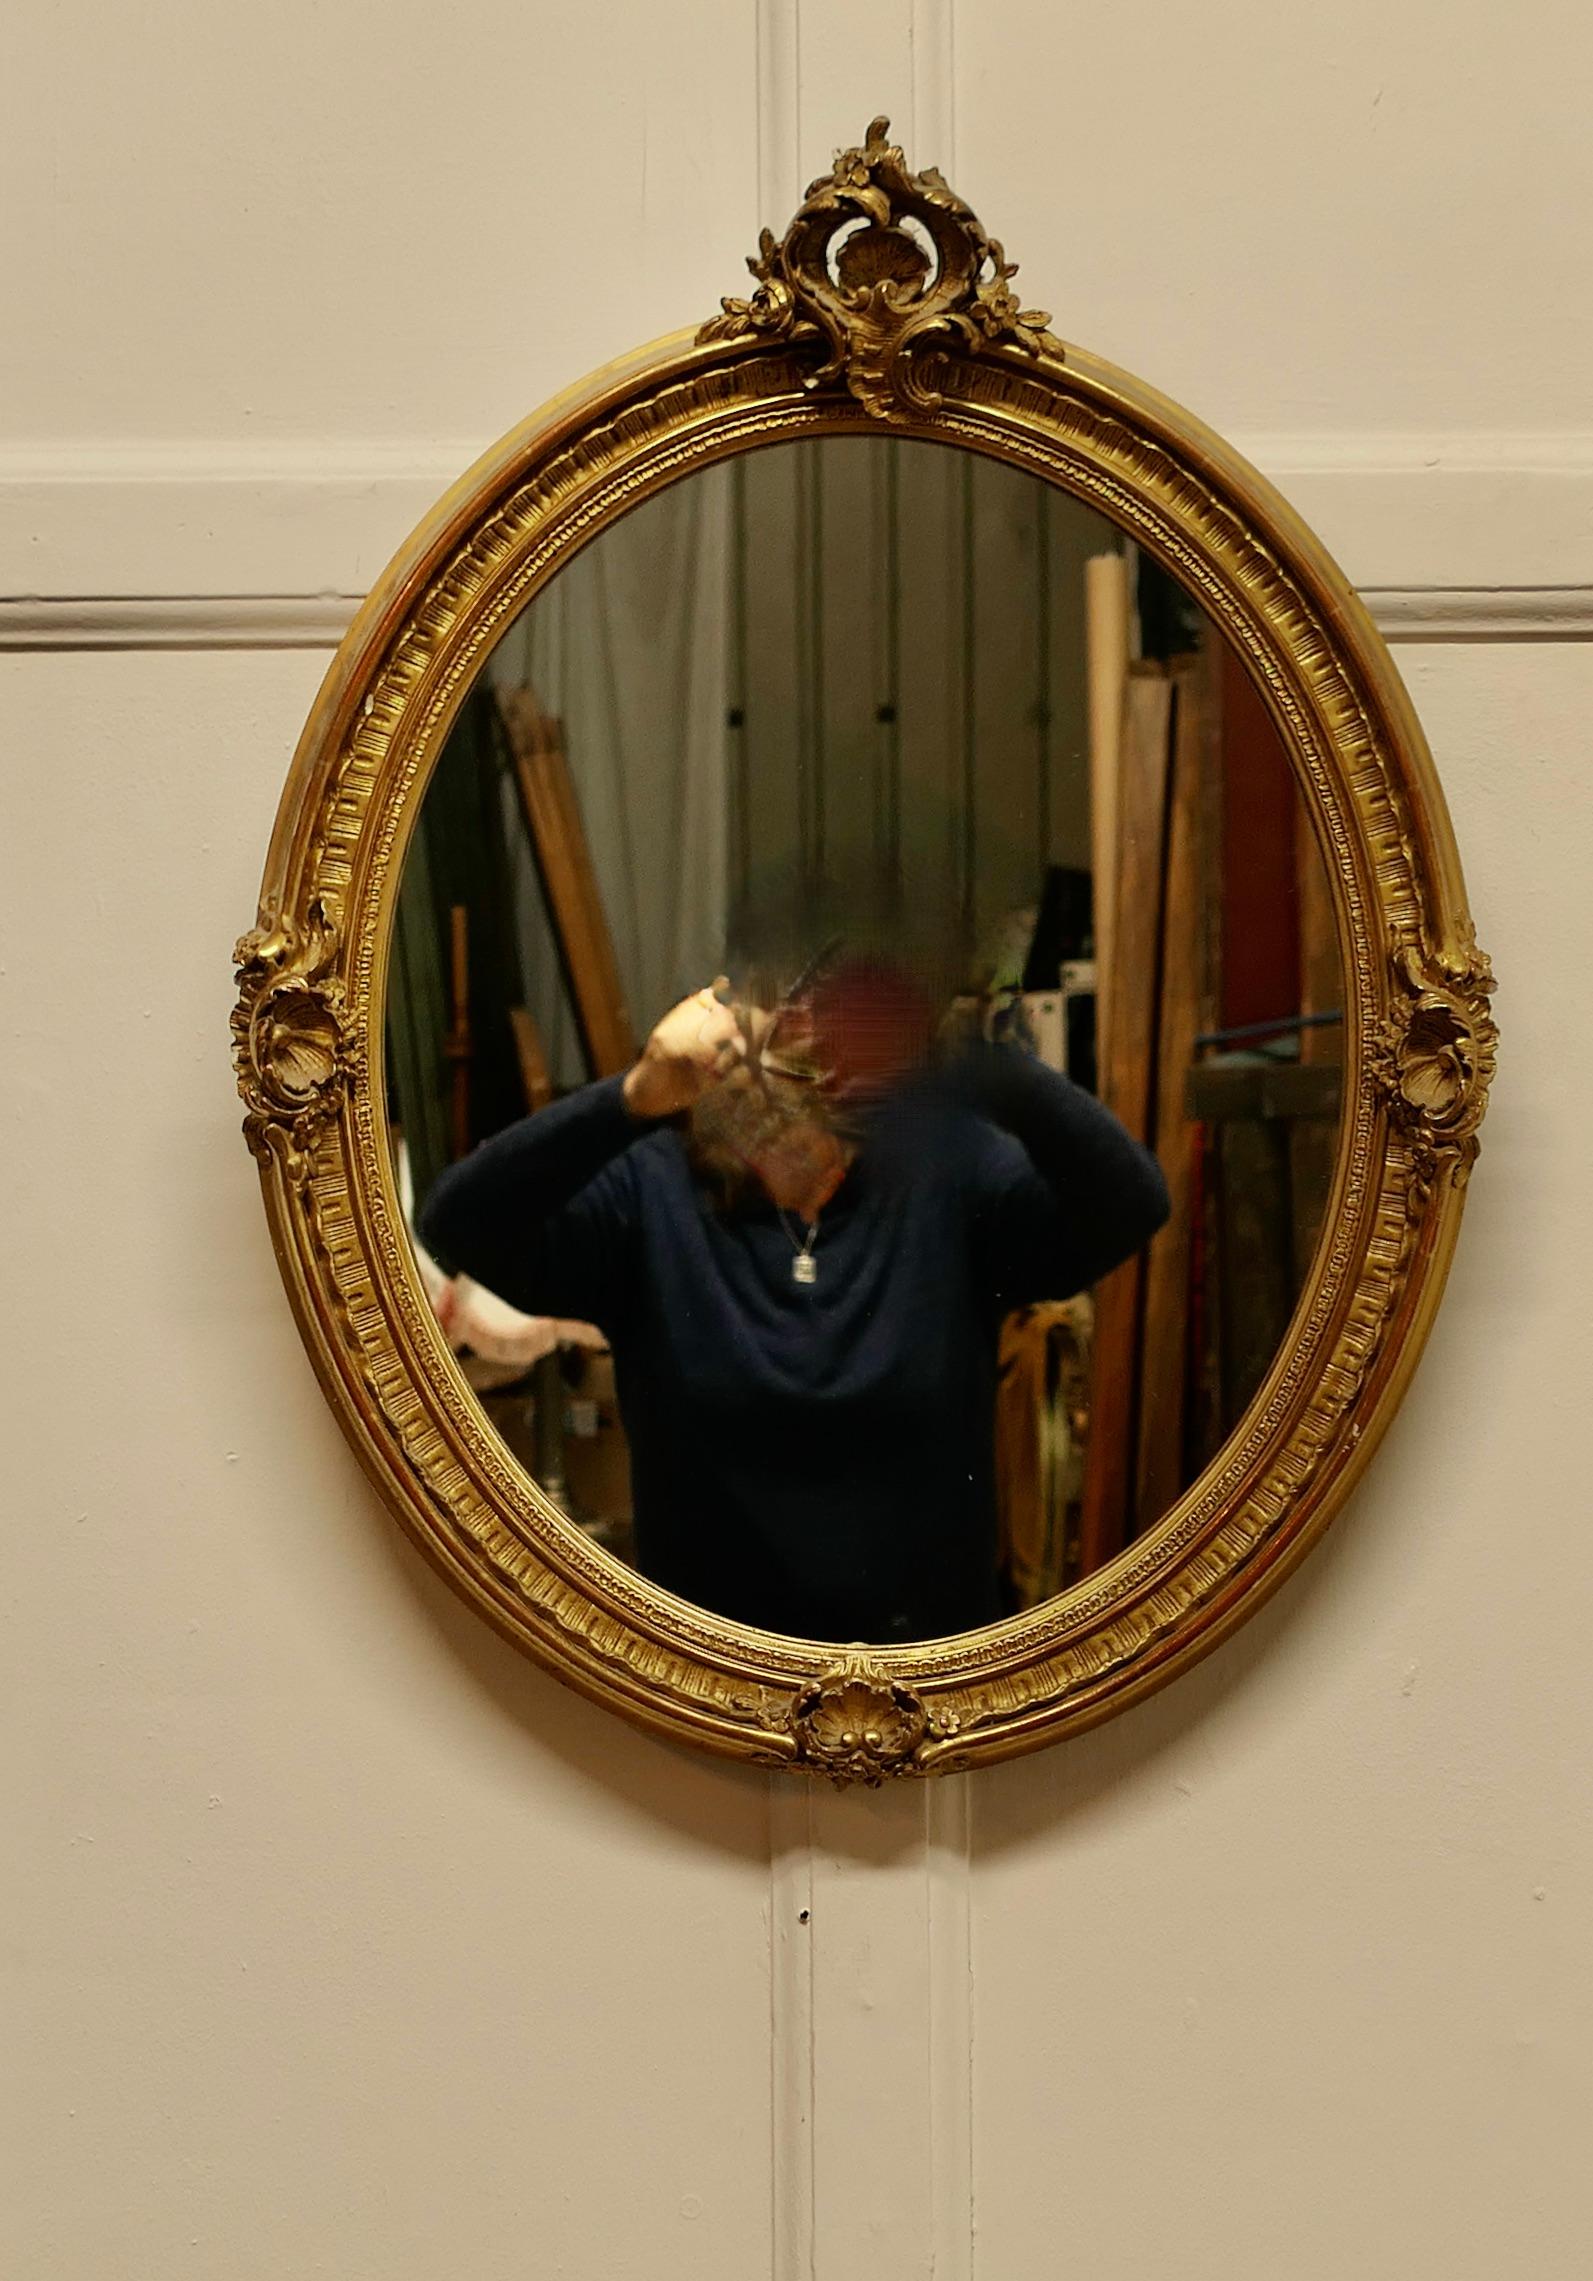 Very Pretty French Rococo Oval Gilt Wall Mirror

The Mirror has an exquisite 3” wide gilt Frame with Gold leaf in the Rococo Style, it is delicately decorated with Shells, Swags and Leaves and it has a lace frill border
The Oval frame is made in